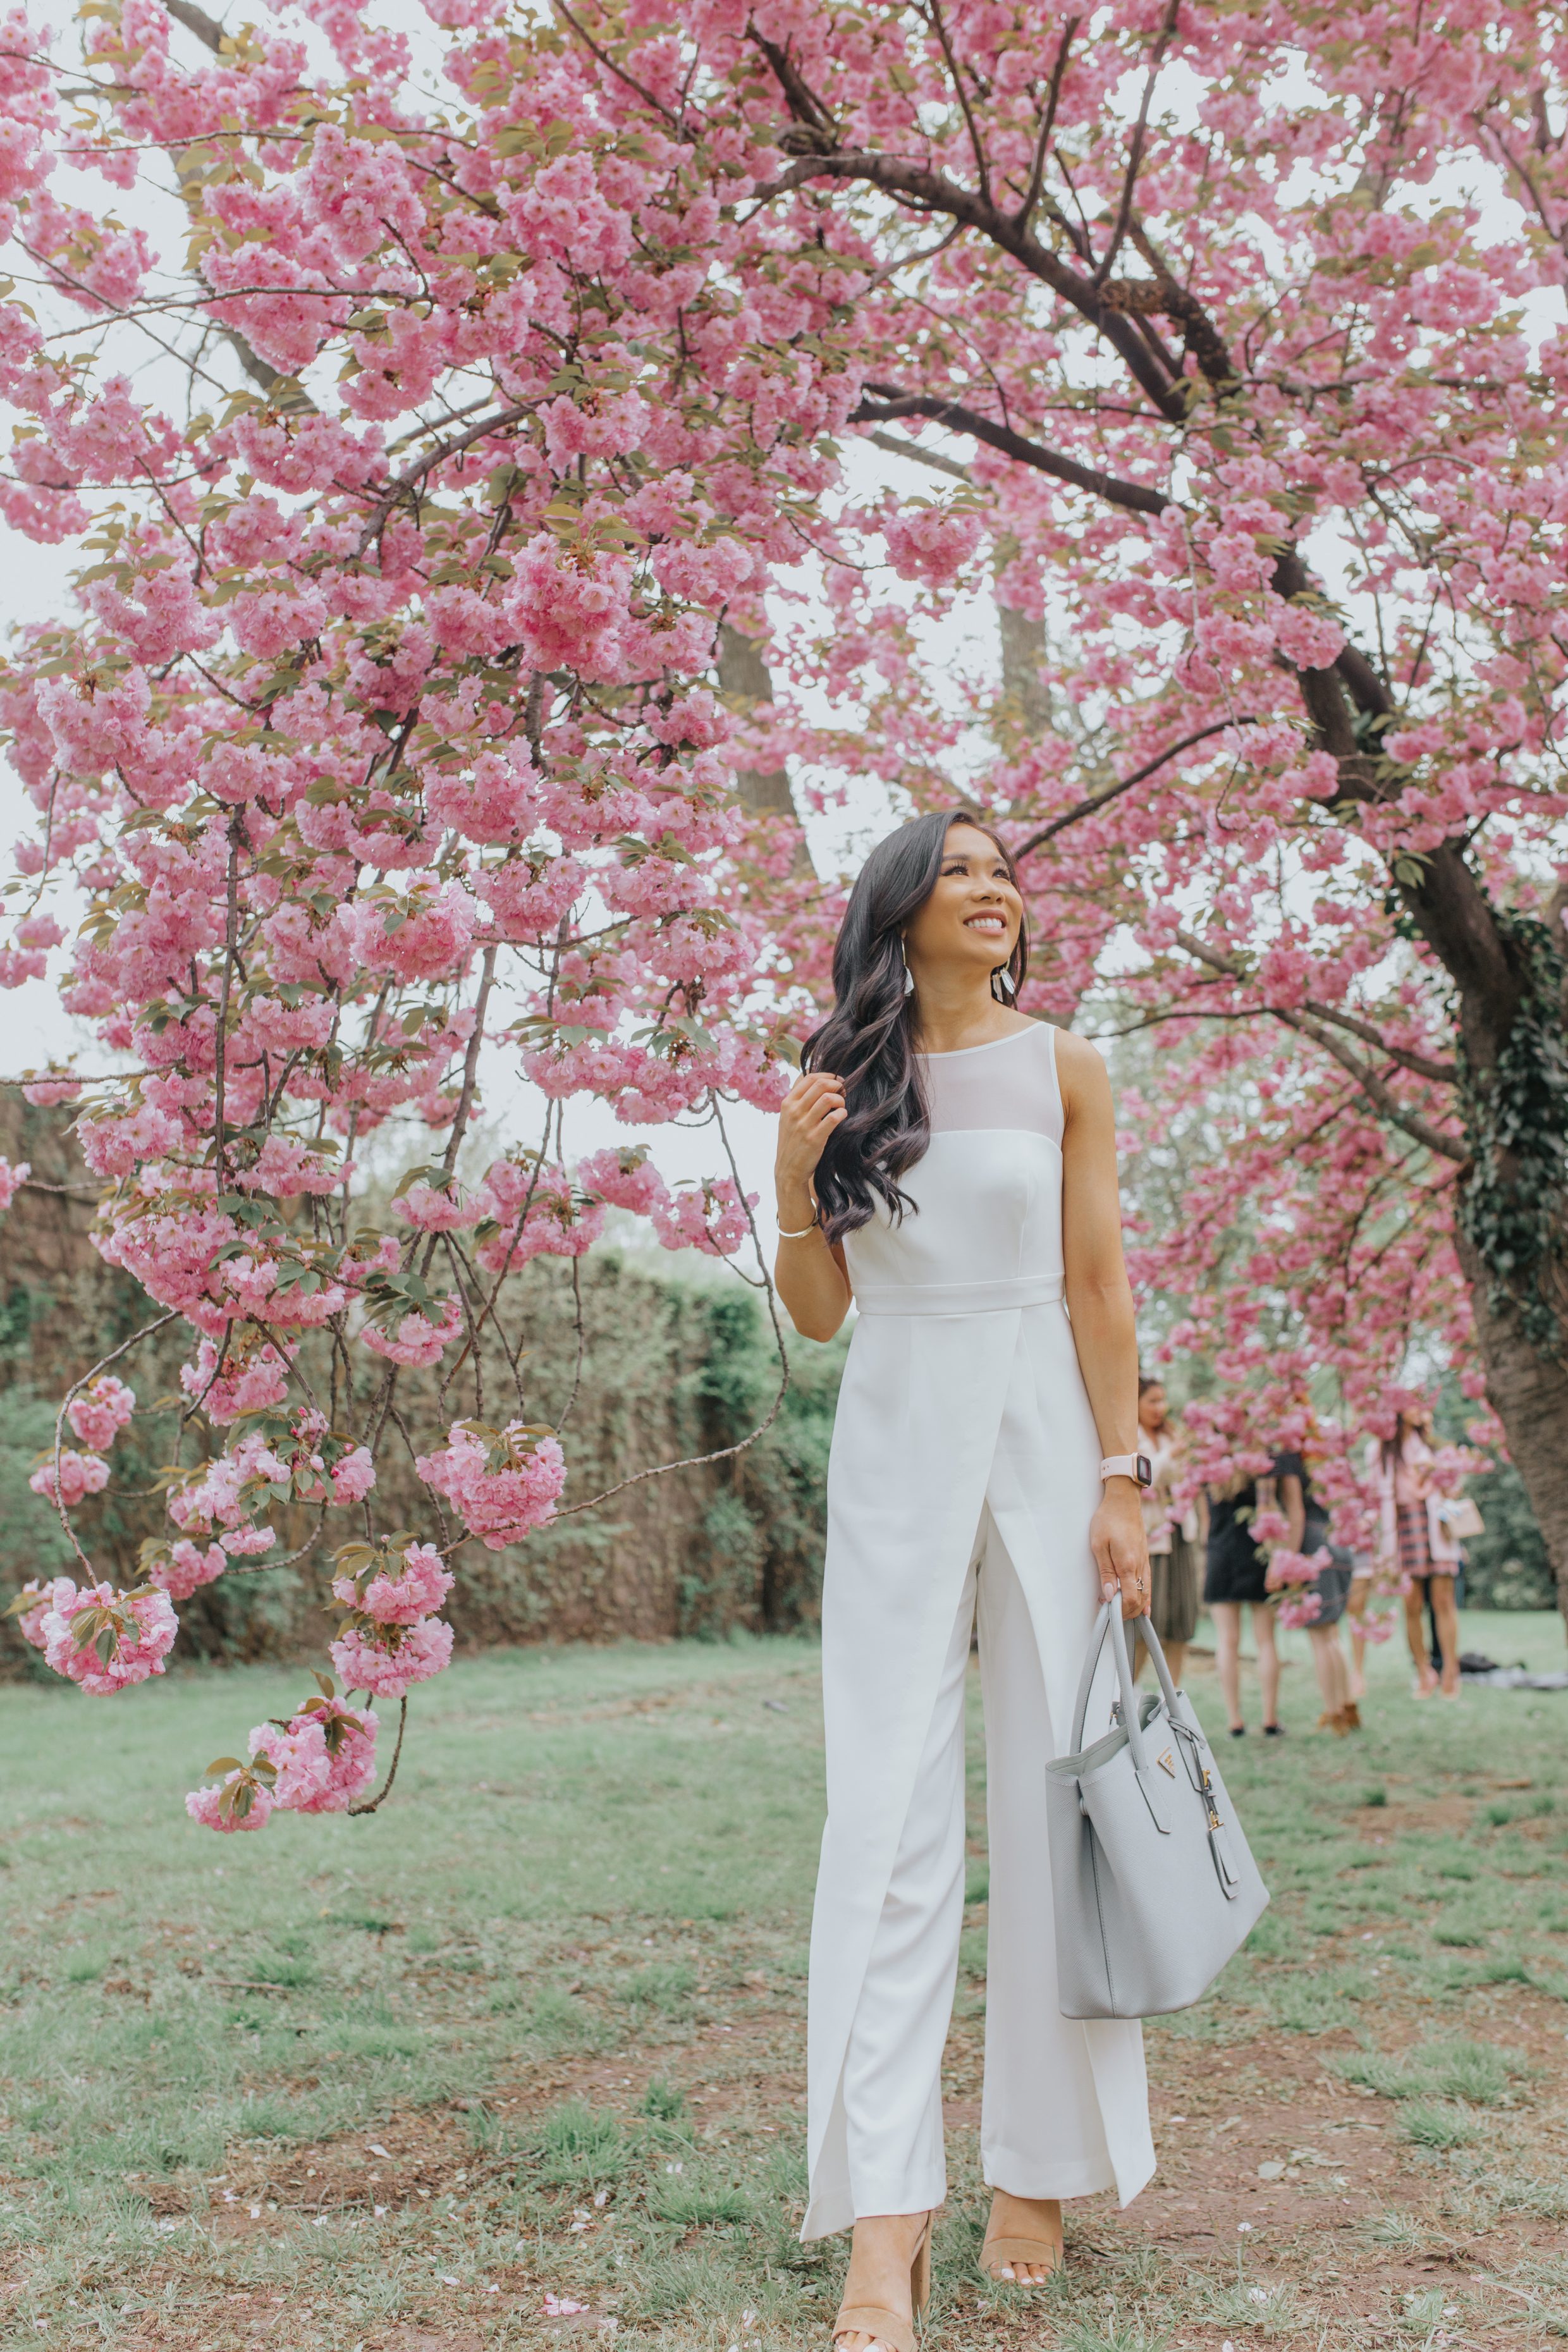 Hoang-Kim wears a white statement jumpsuit amidst the cherry blossoms in Washington, D.C.